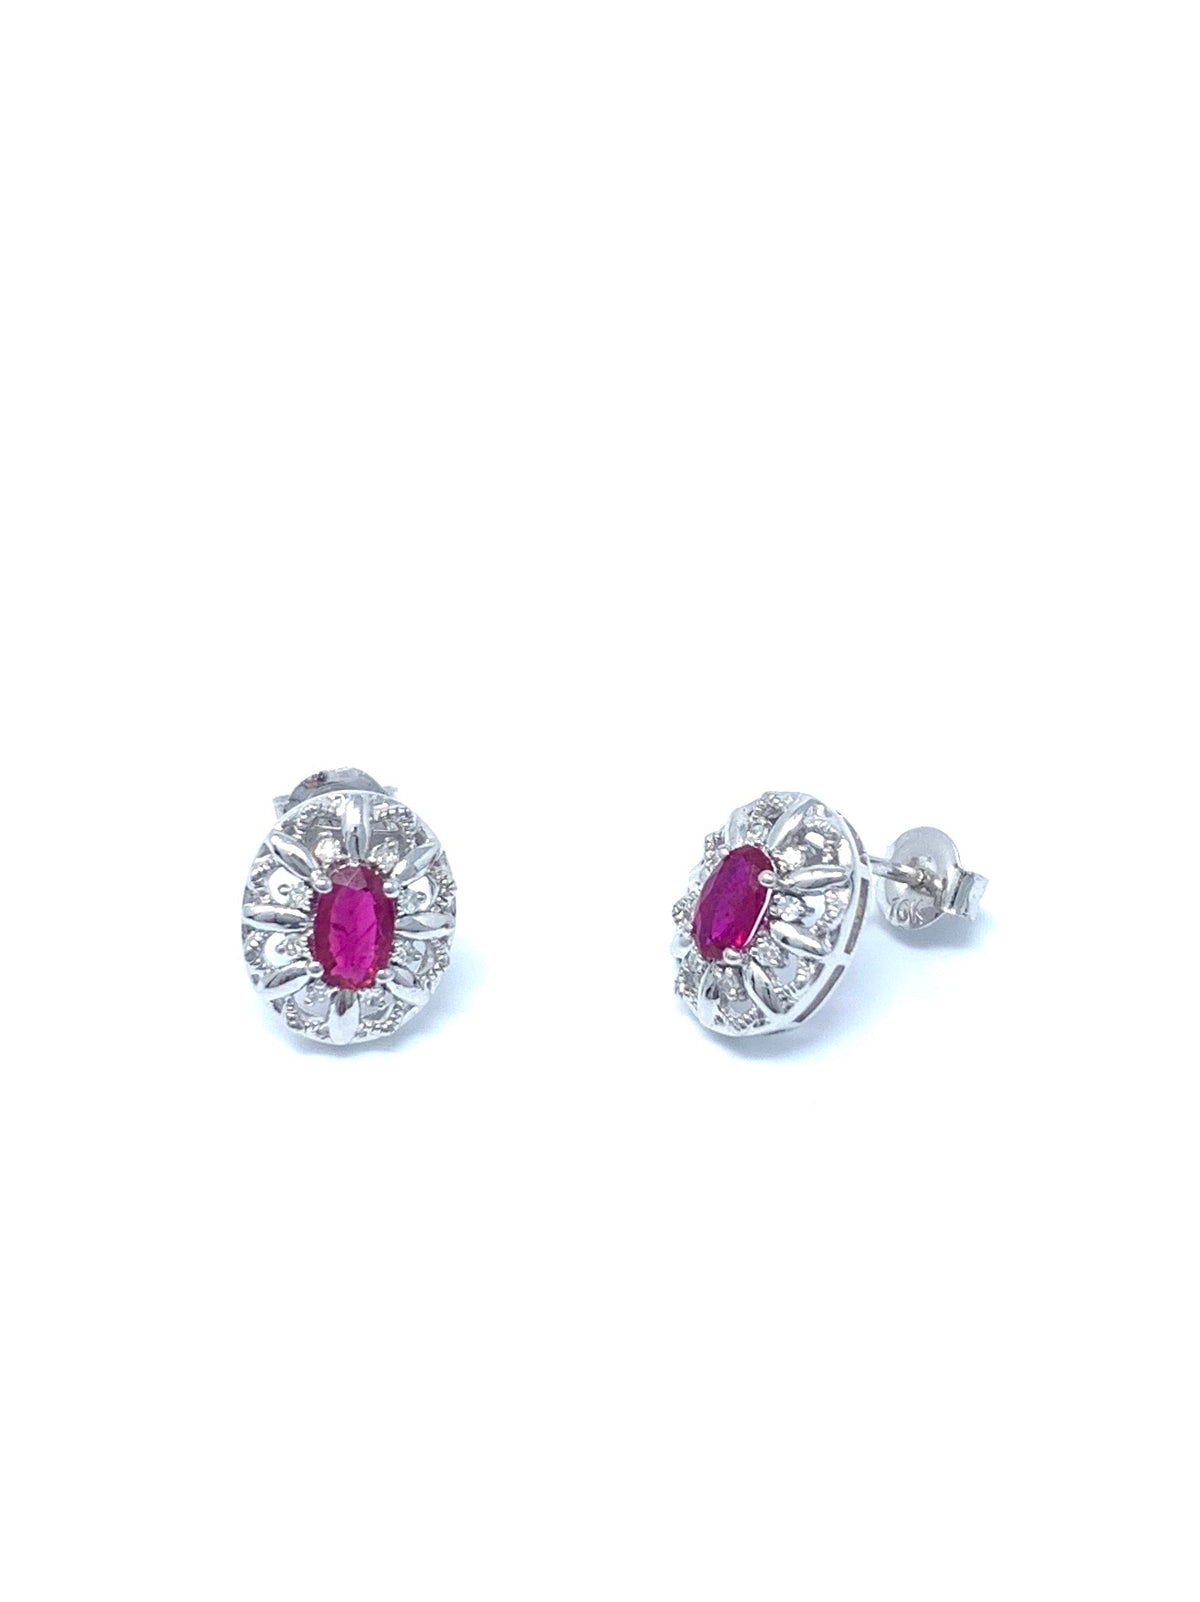 10K White Gold 0.65cttw Genuine Ruby and 0.08cttw Diamond Earrings